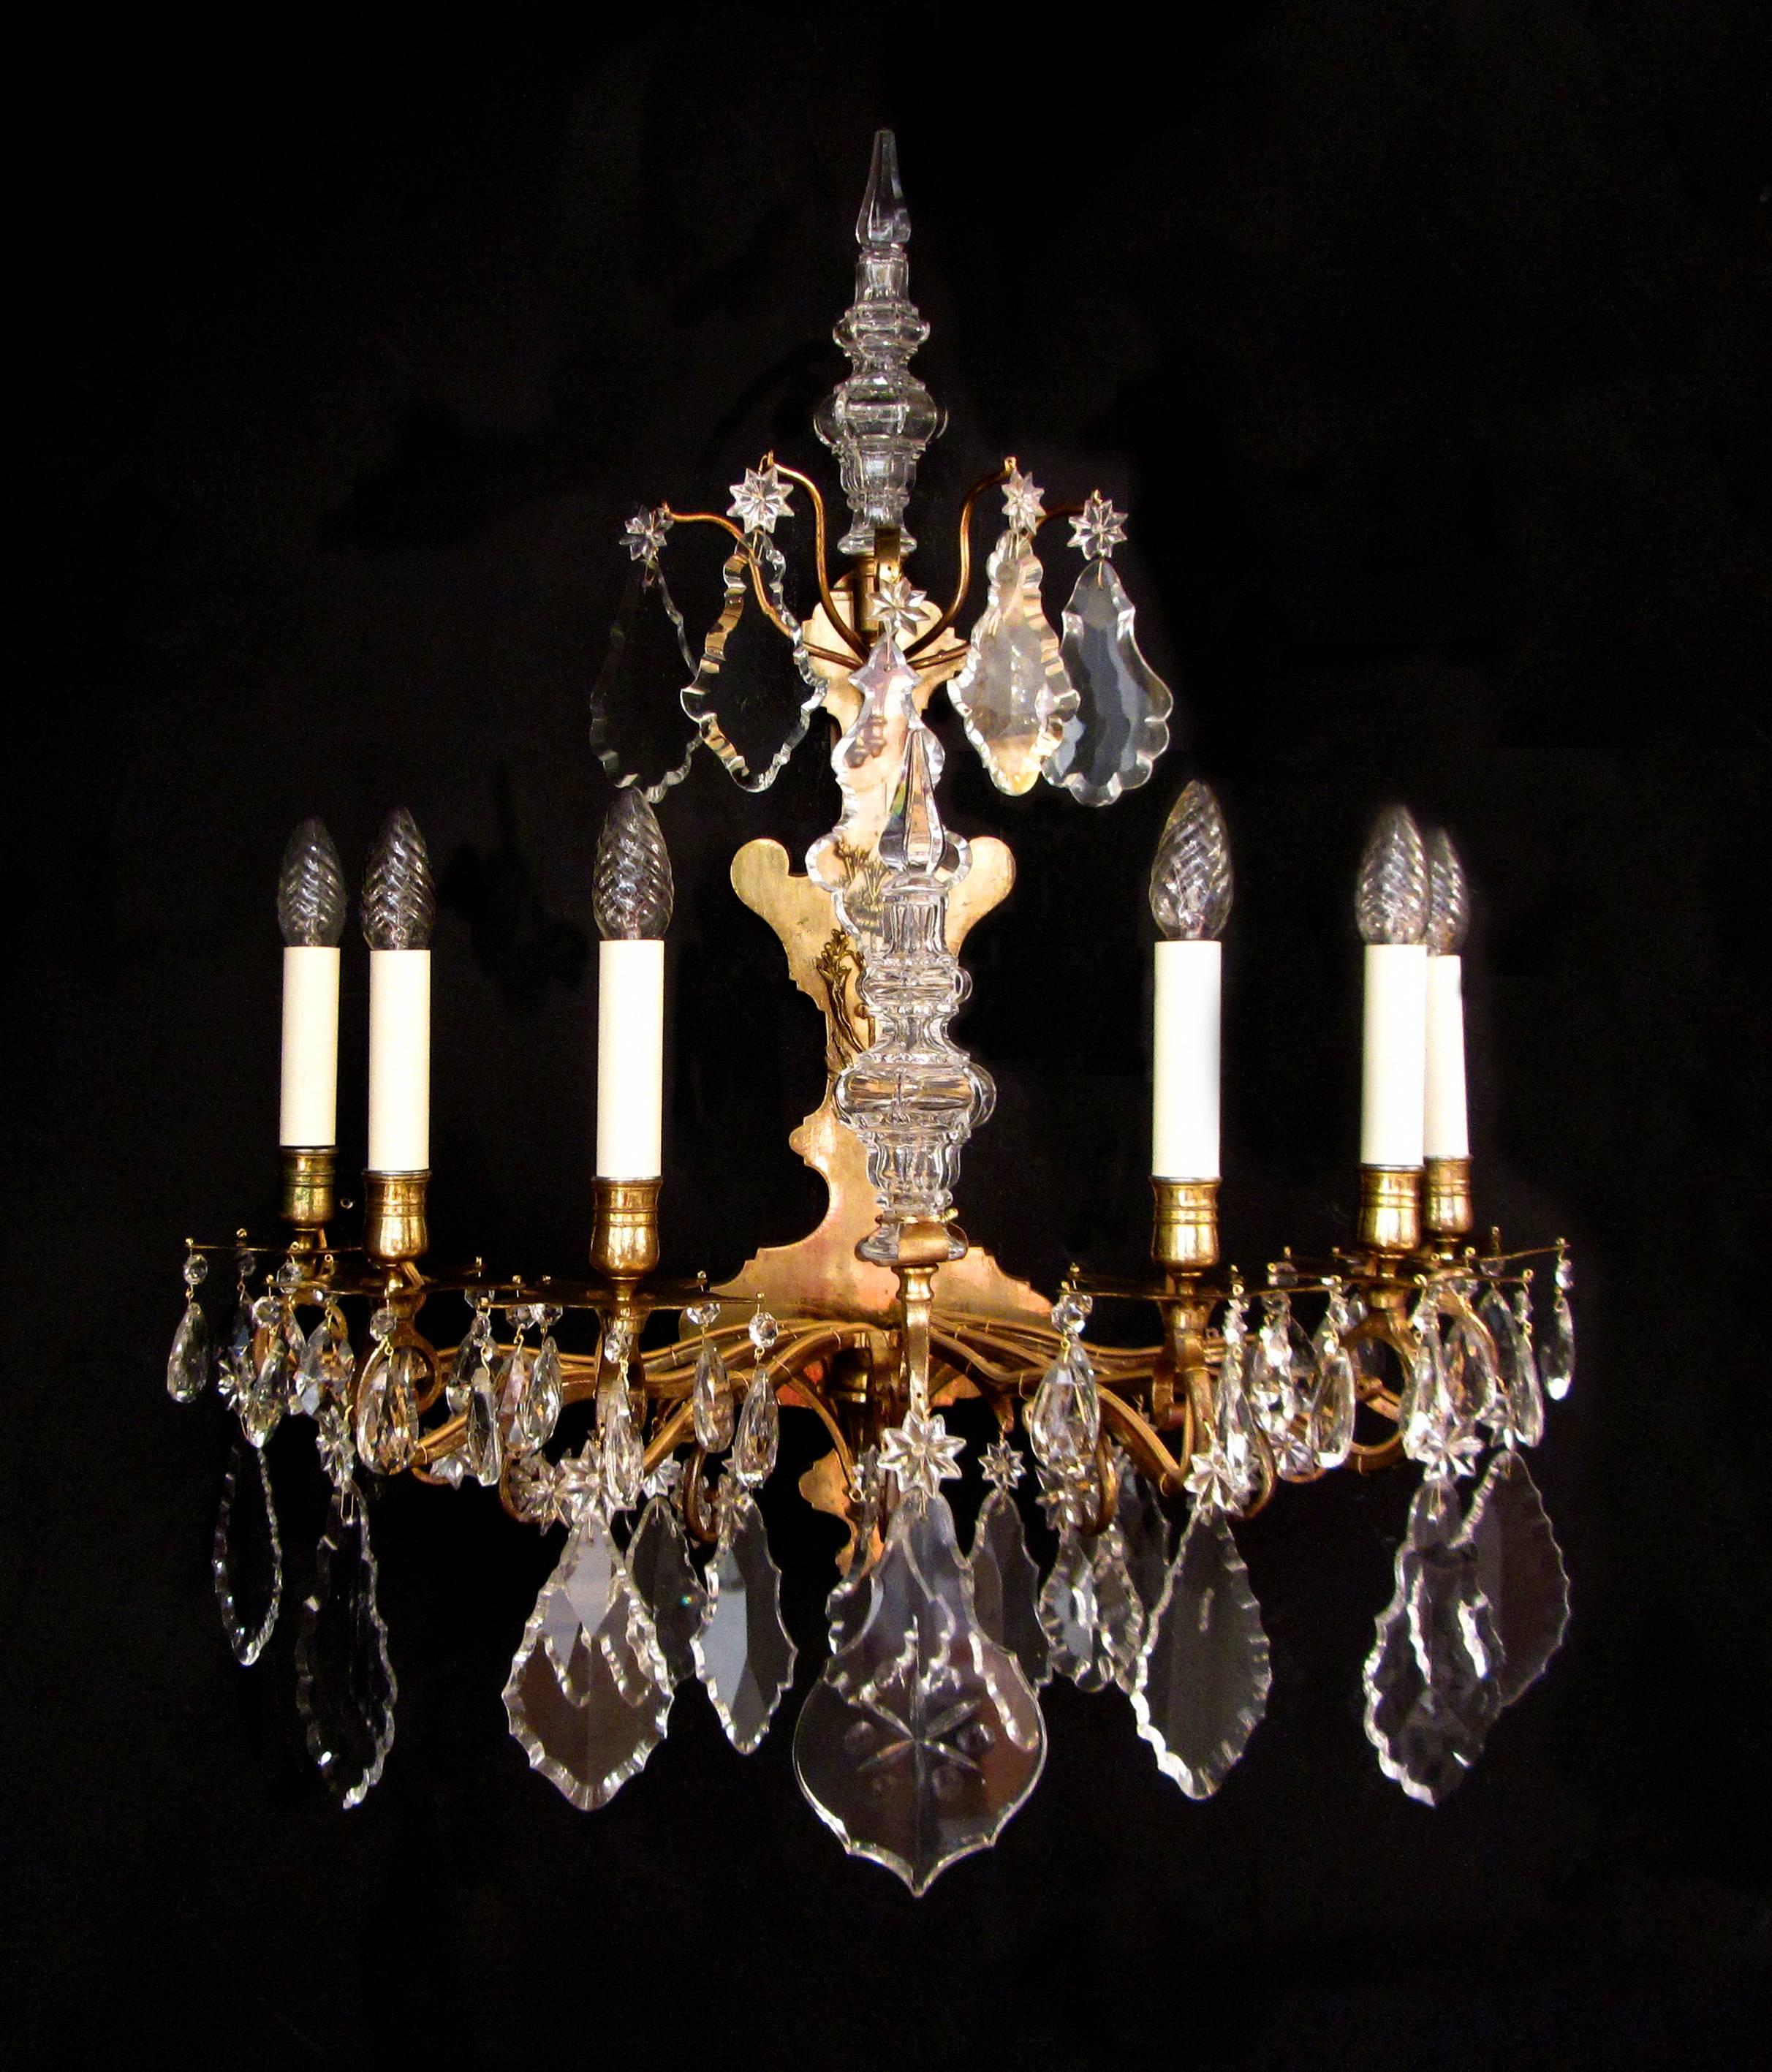 A large pair of French gilt bronze and crystal wall lights. The frame projecting six arms of light with cut-glass plaques, stars and finials, circa 1840.